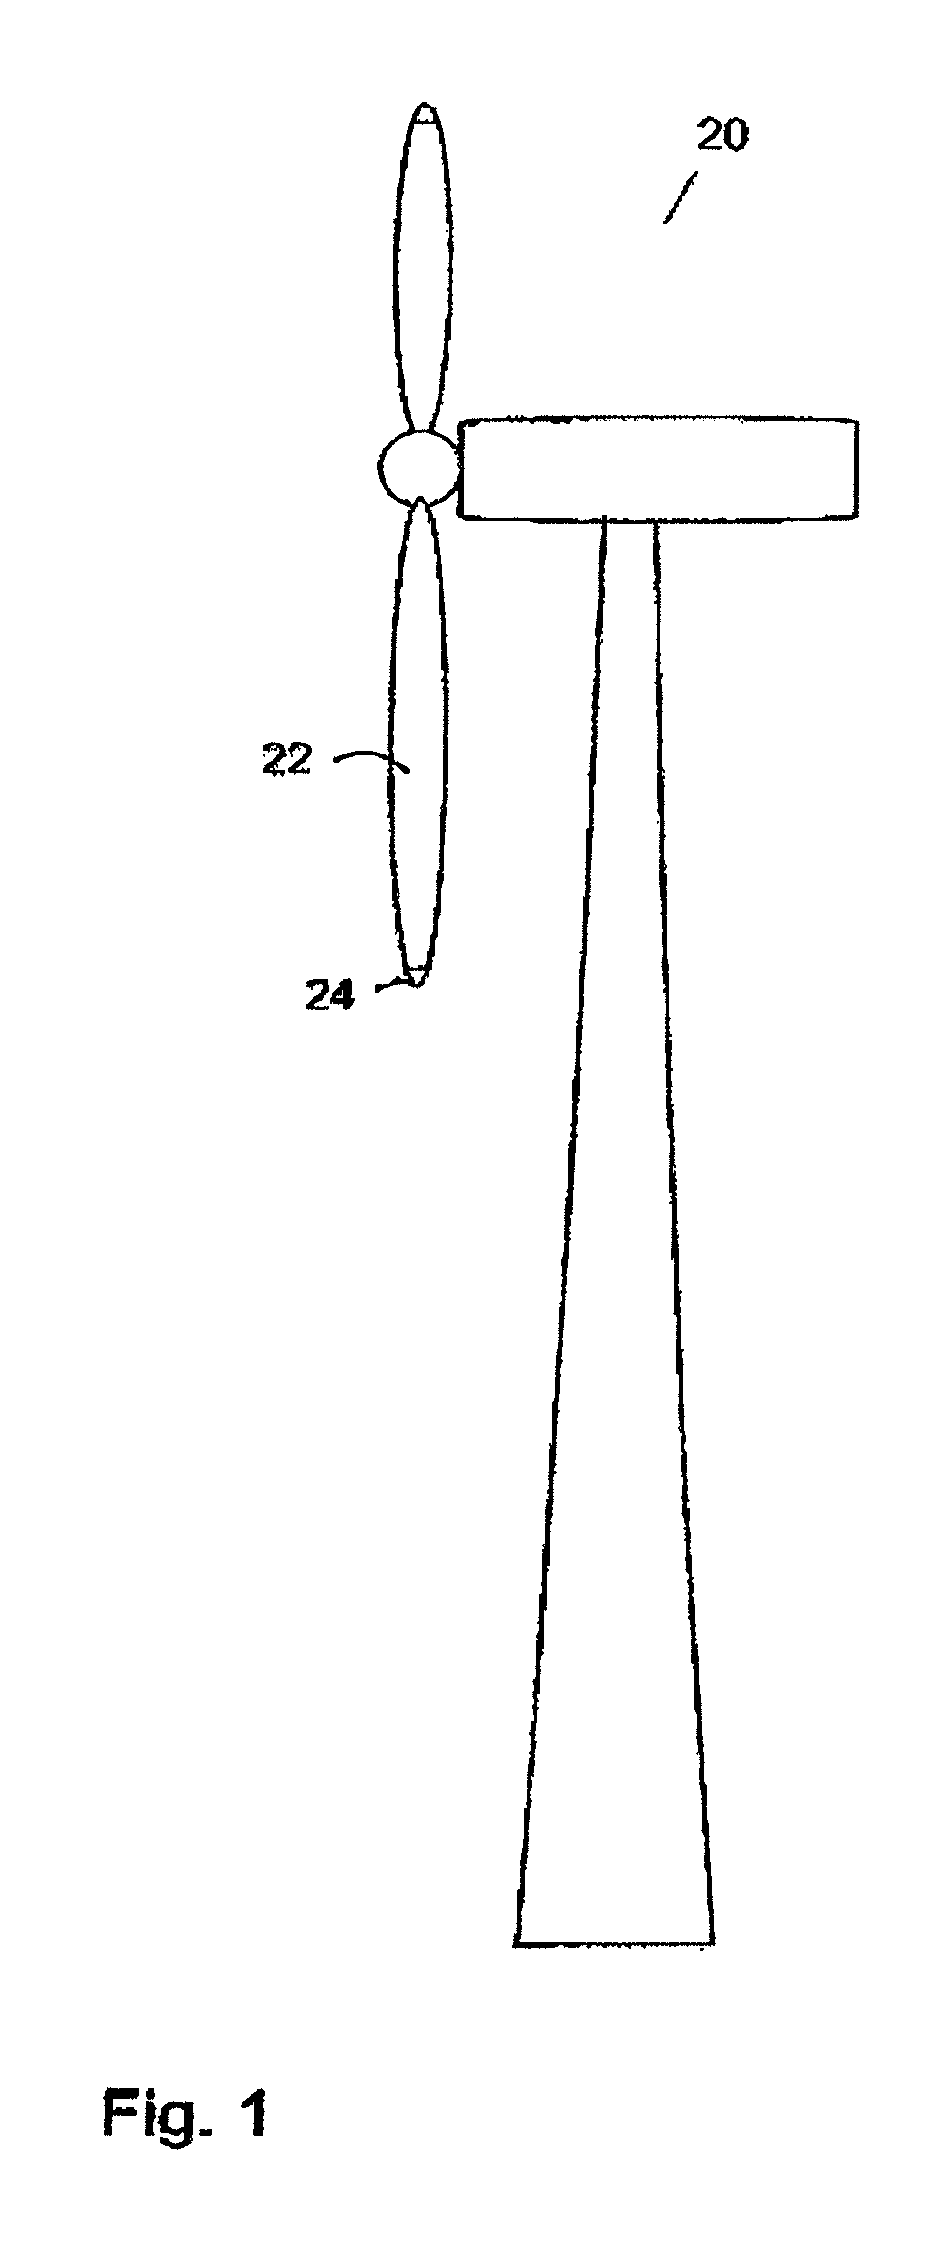 Blade tip for a rotor blade of a wind turbine and a method of inserting the blade tip into a rotor blade